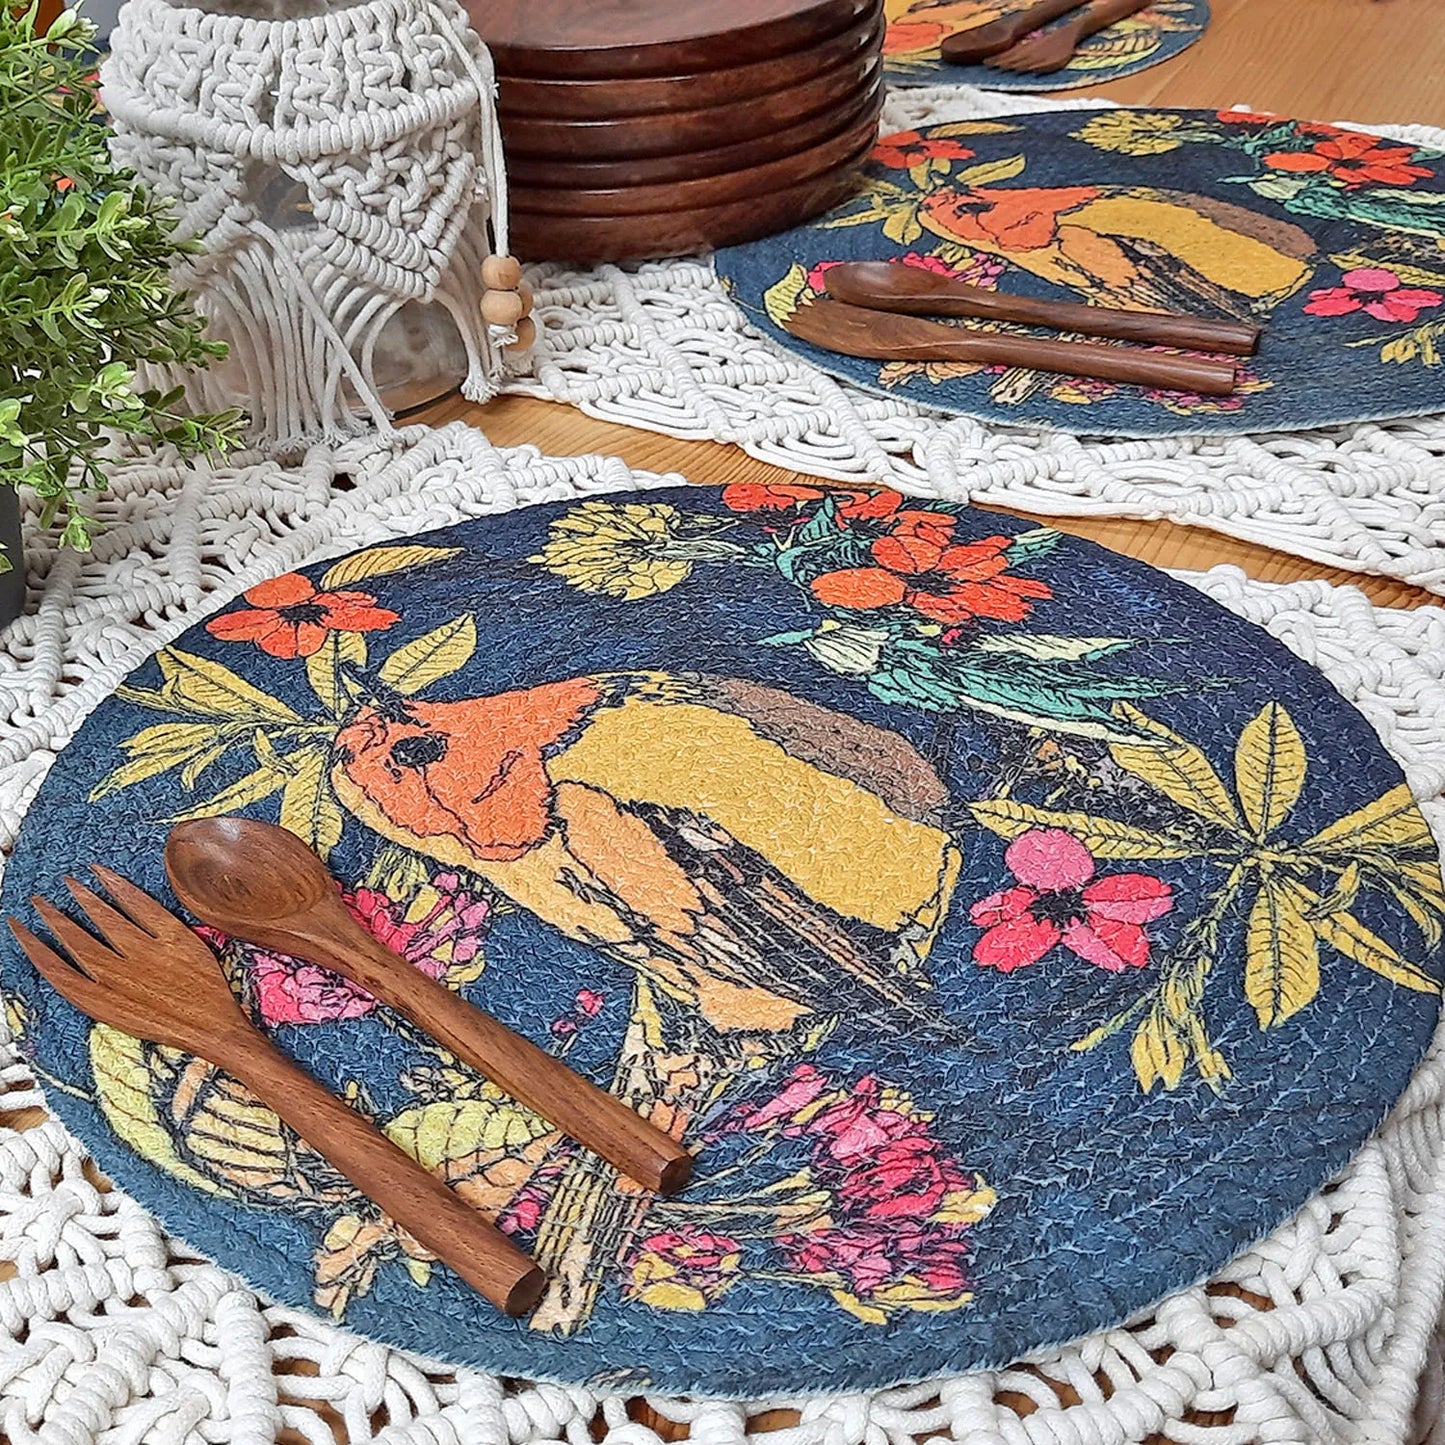 All Natural Round Cotton Braided Placemats – Bird On Branch